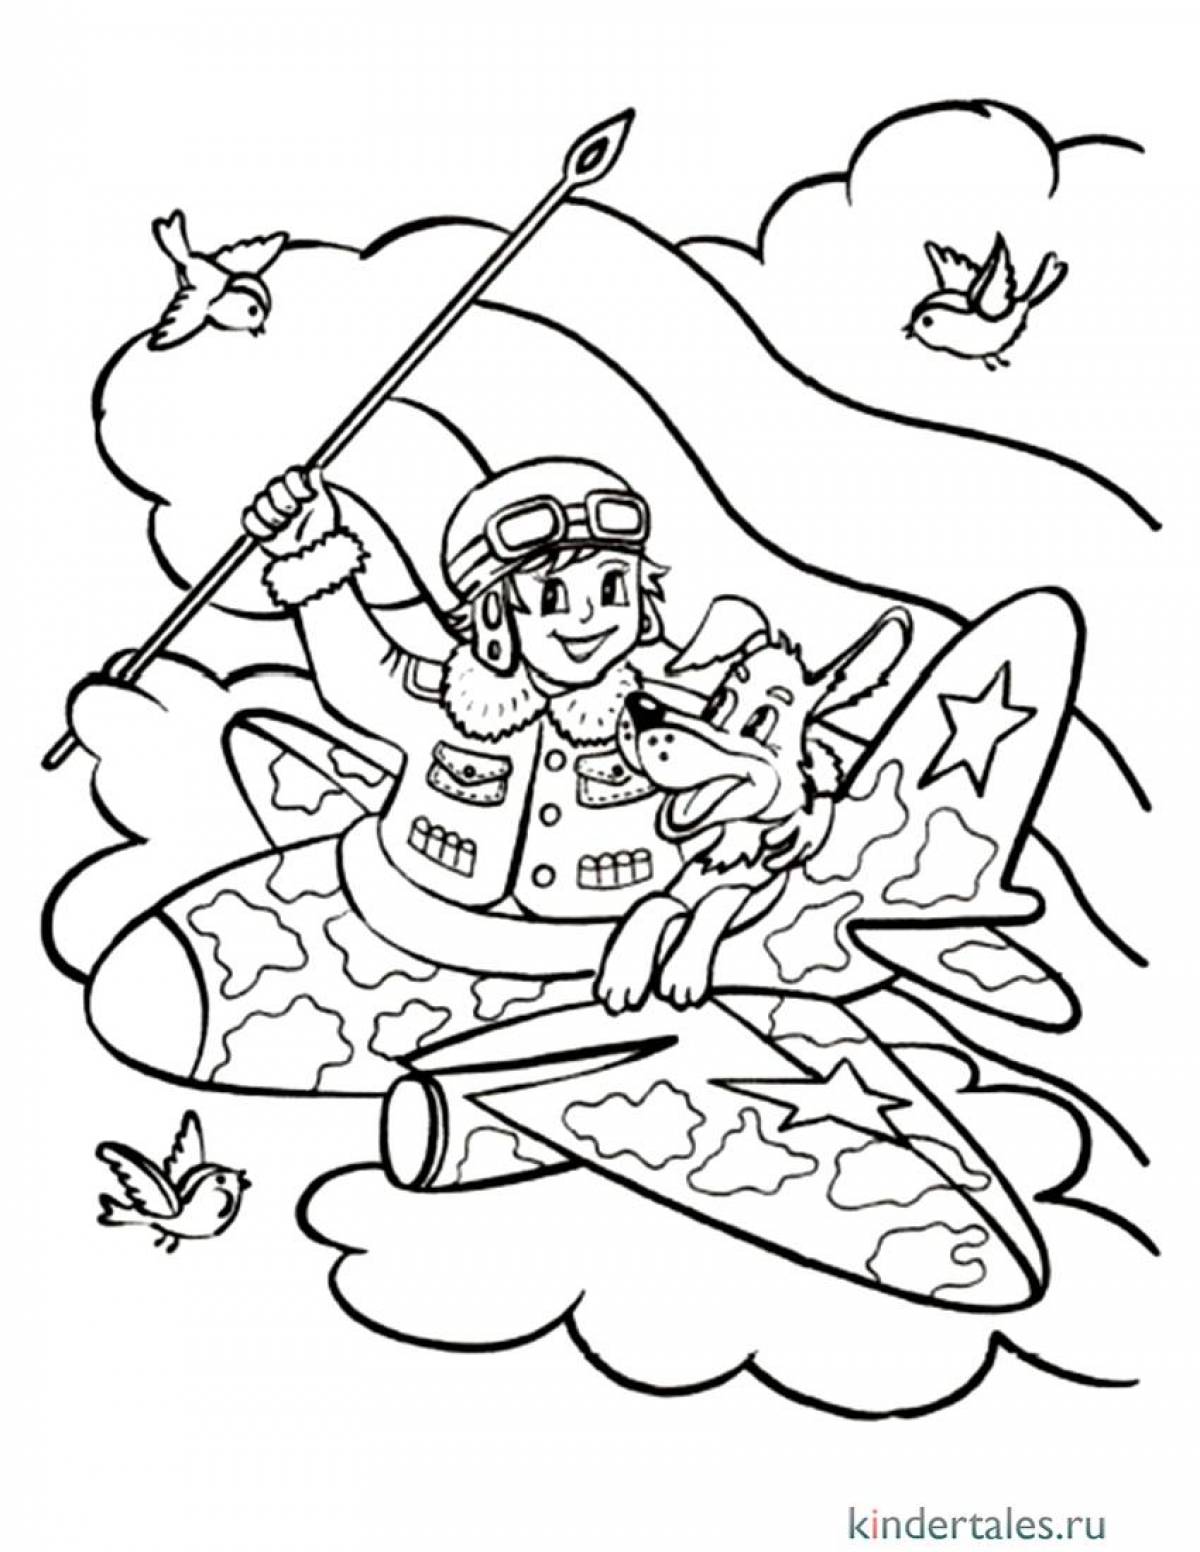 Great military coloring book for kids